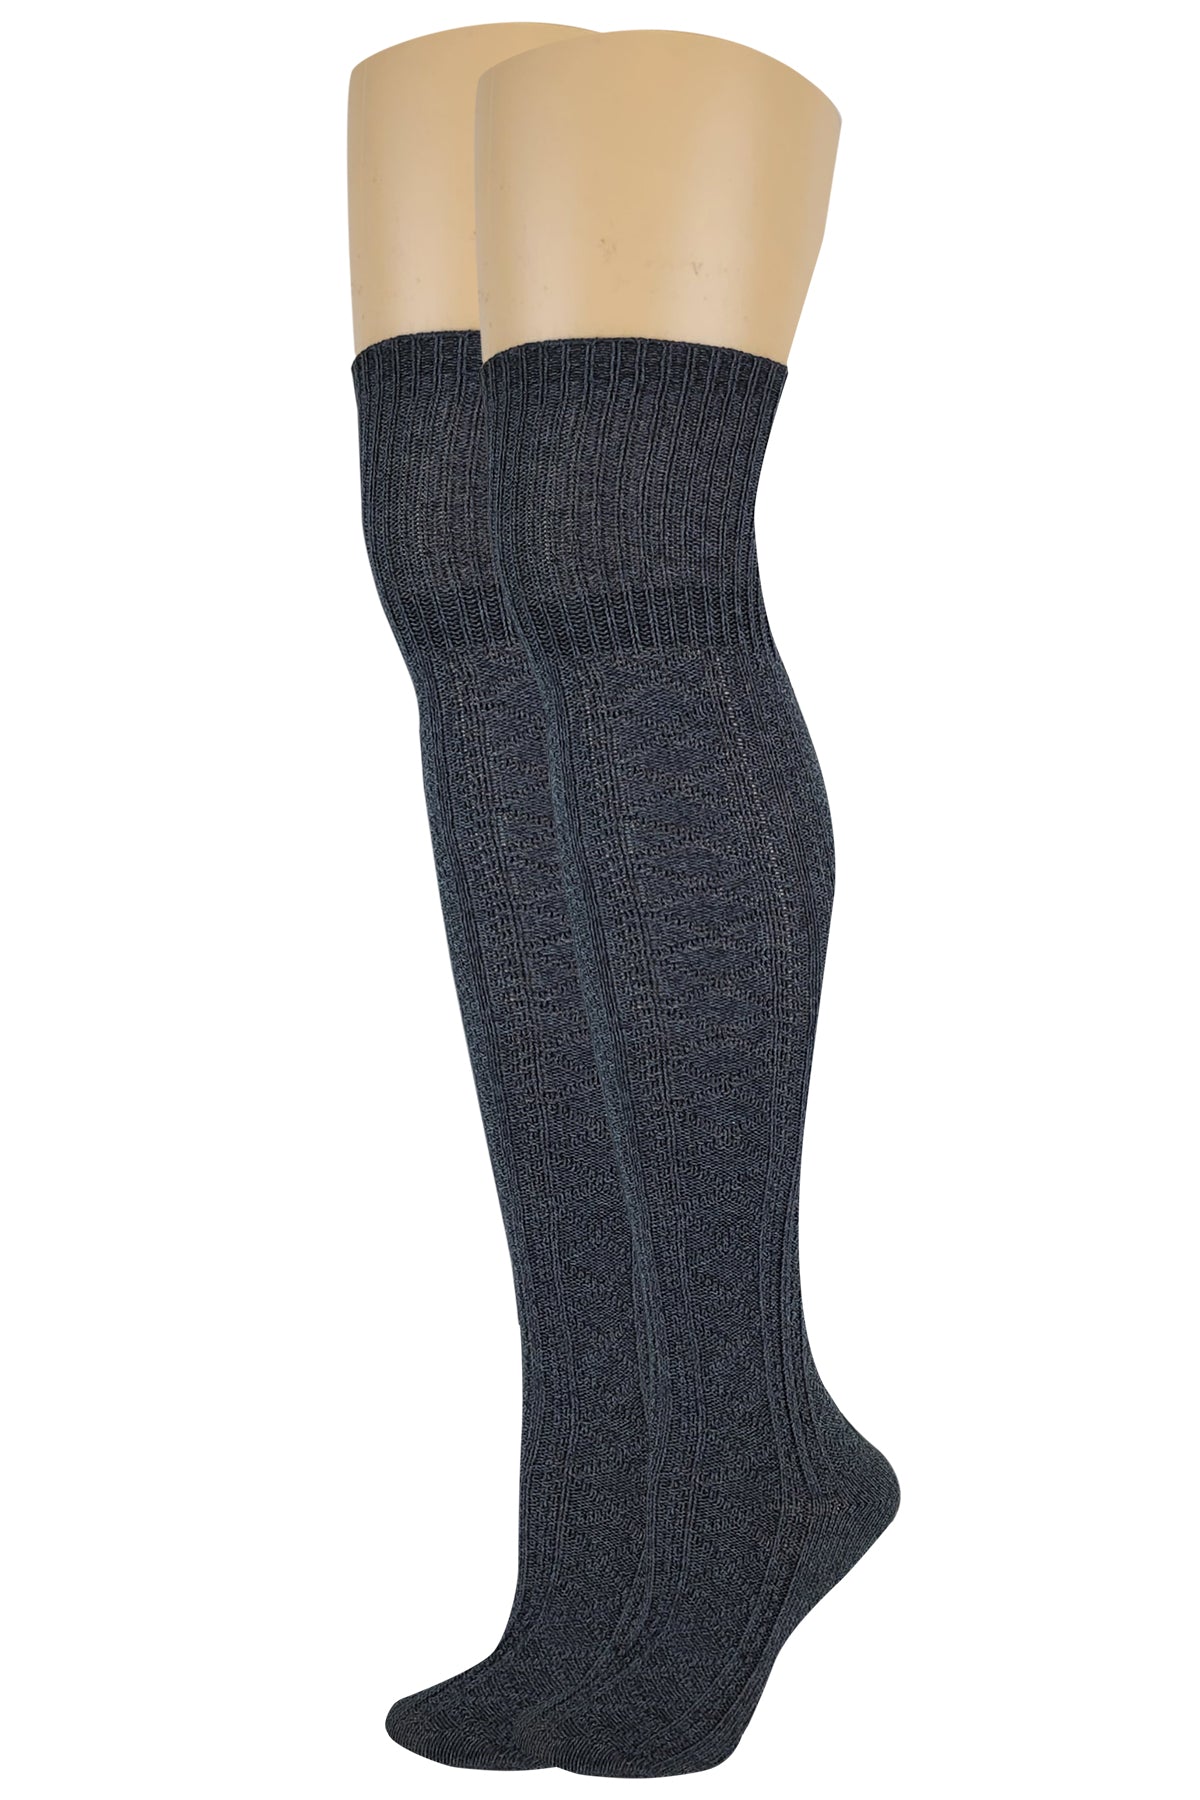 Over the Knee Tigh-High Socks | Knit Assorted Colors | Women (6 Pairs)